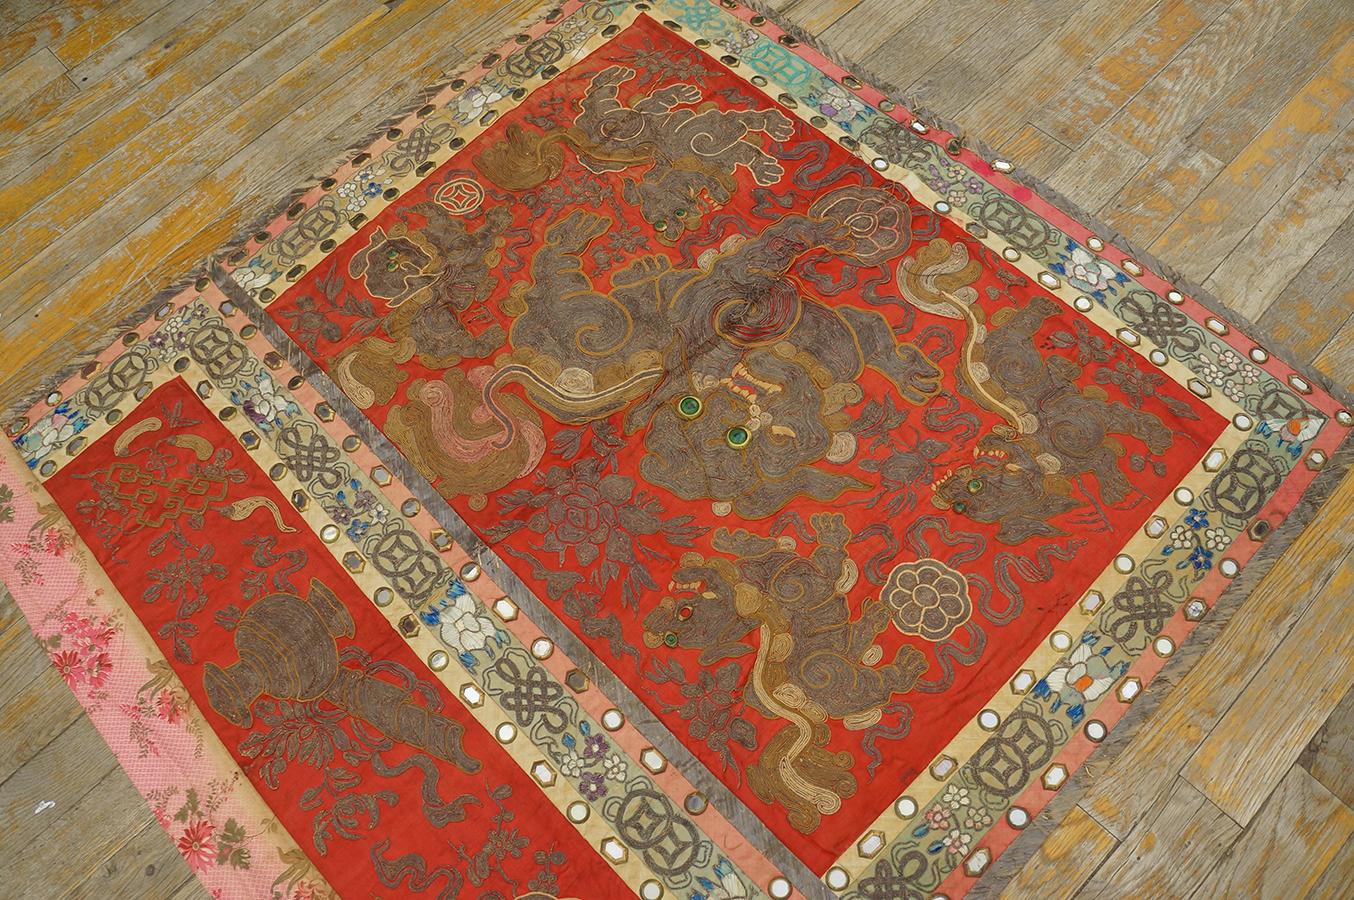 Early 20th Century Chinese Silk Embroidery ( 3' x 3' x 92 x 92 ) For Sale 2